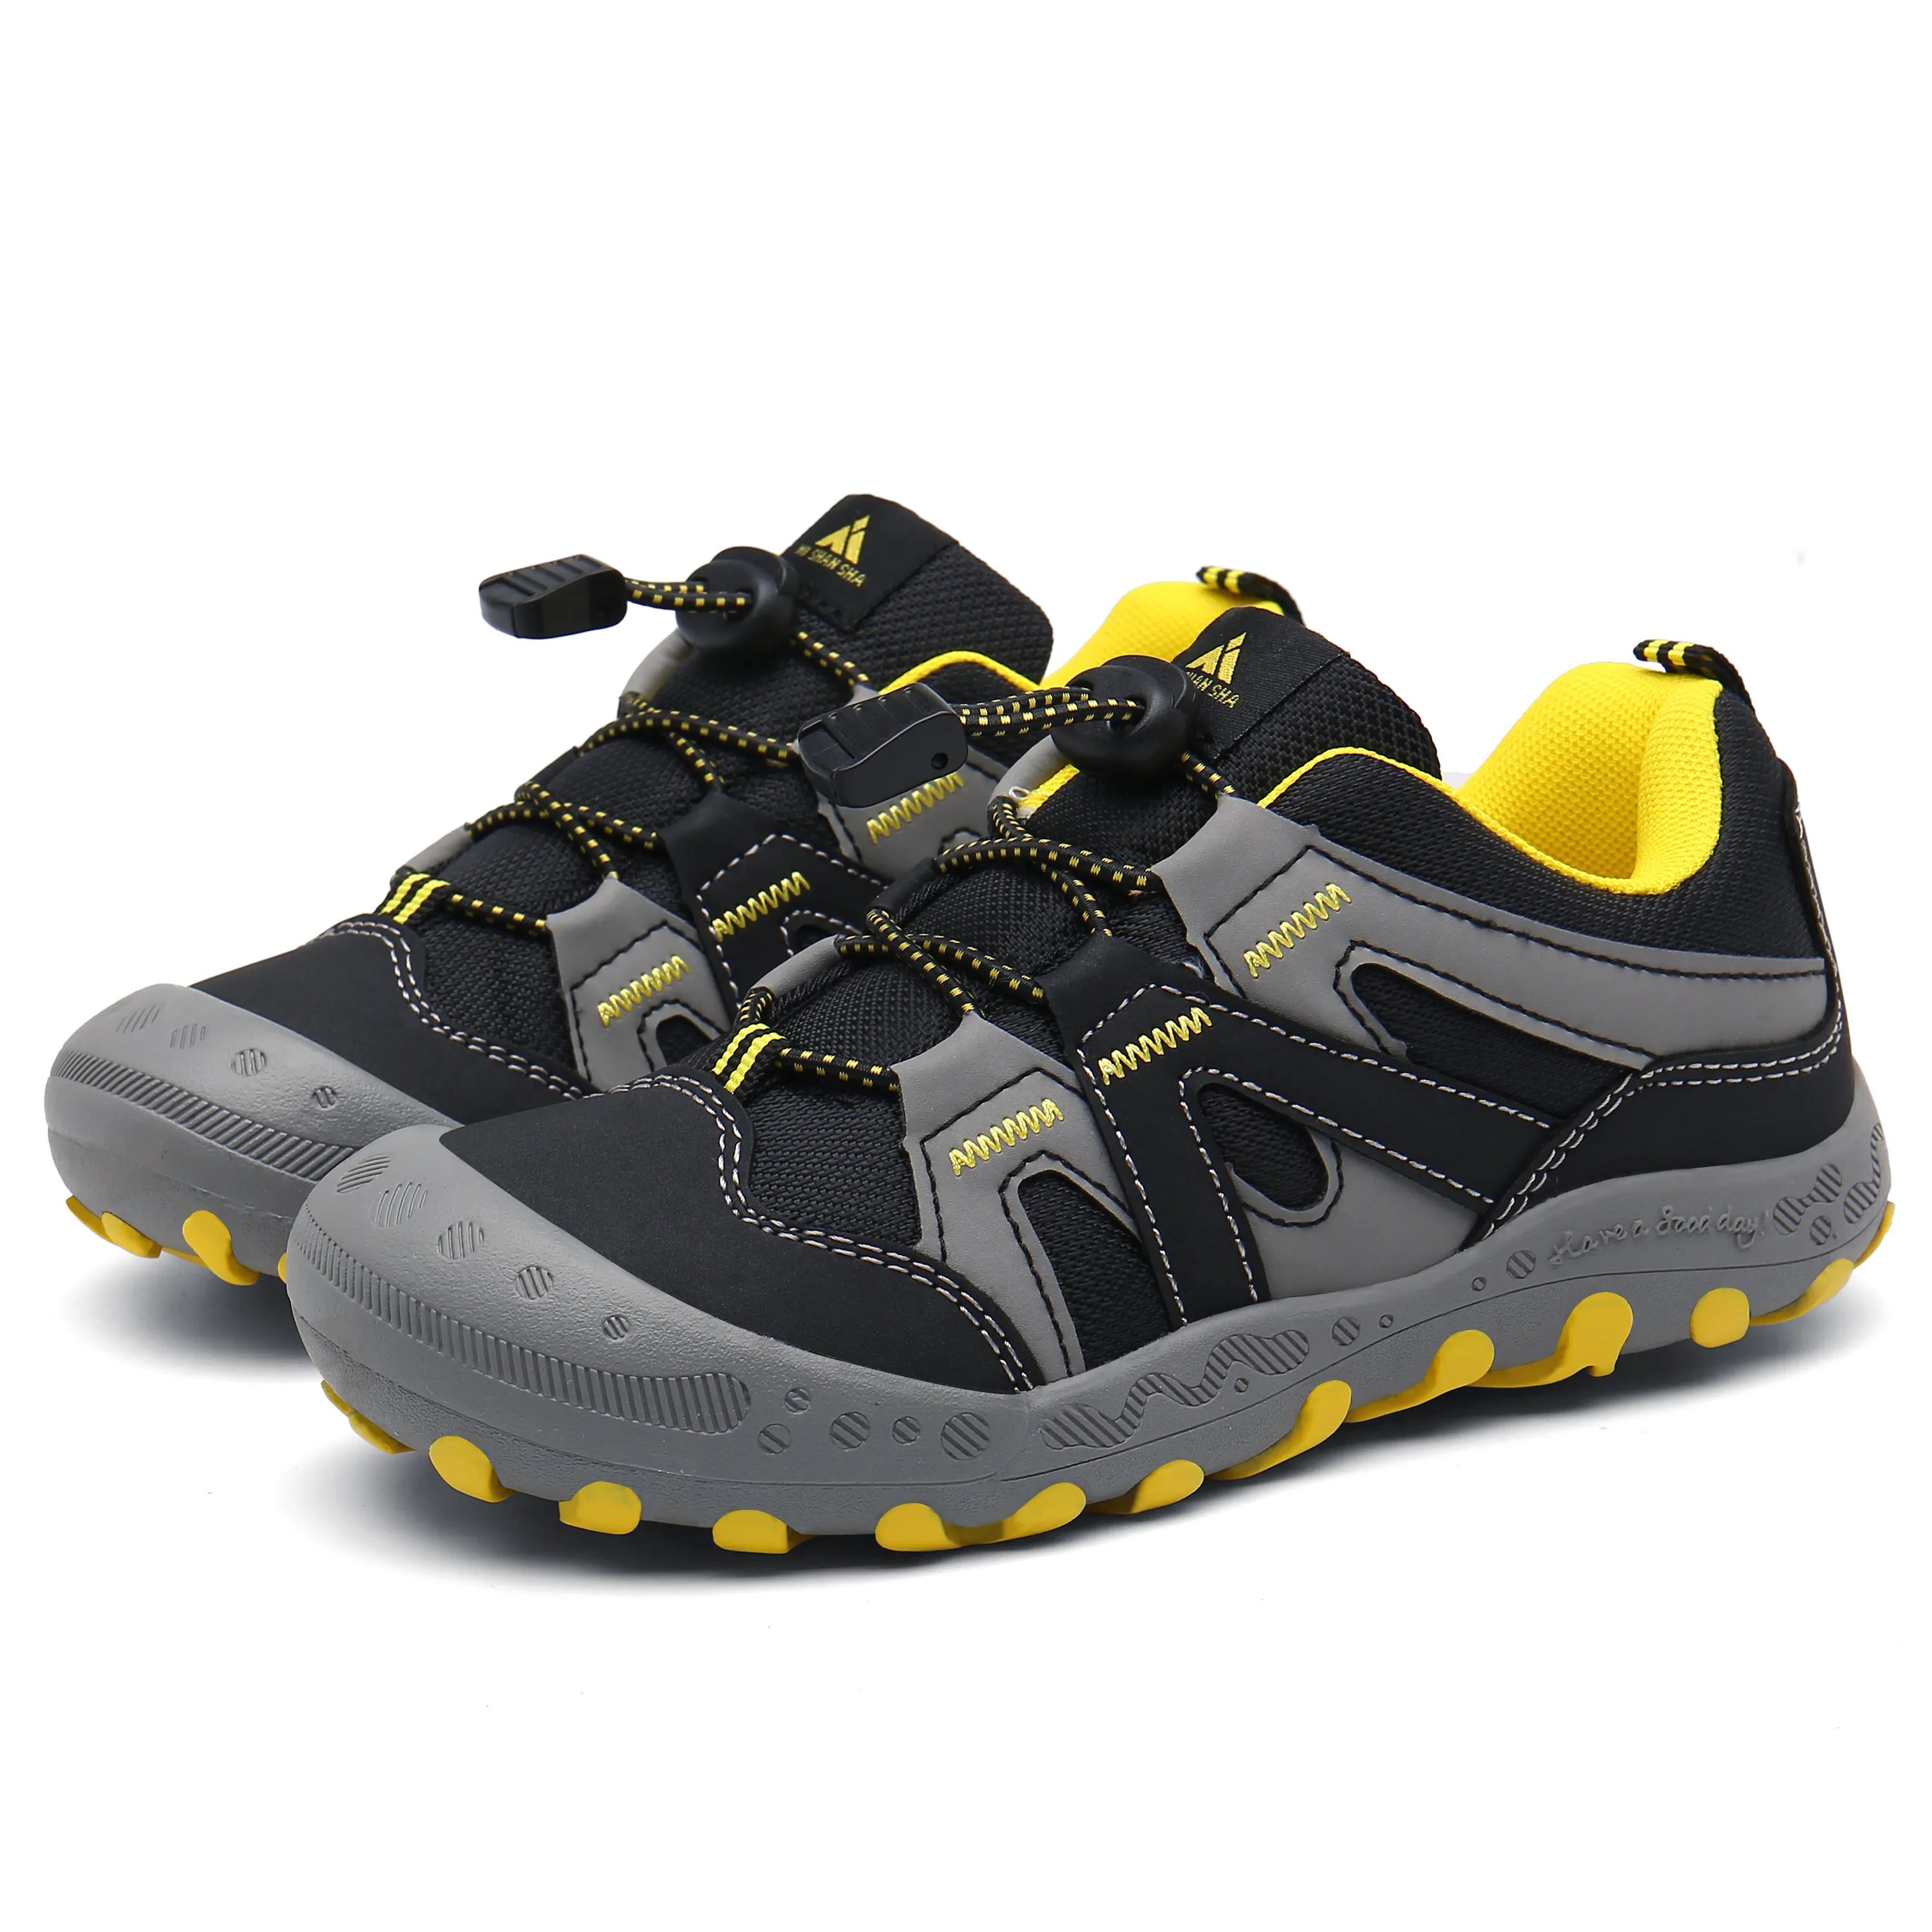 Boys Girls Athletic Hiking Shoes Anti Collision Non Slip Outdoor Walking Running Sneakers